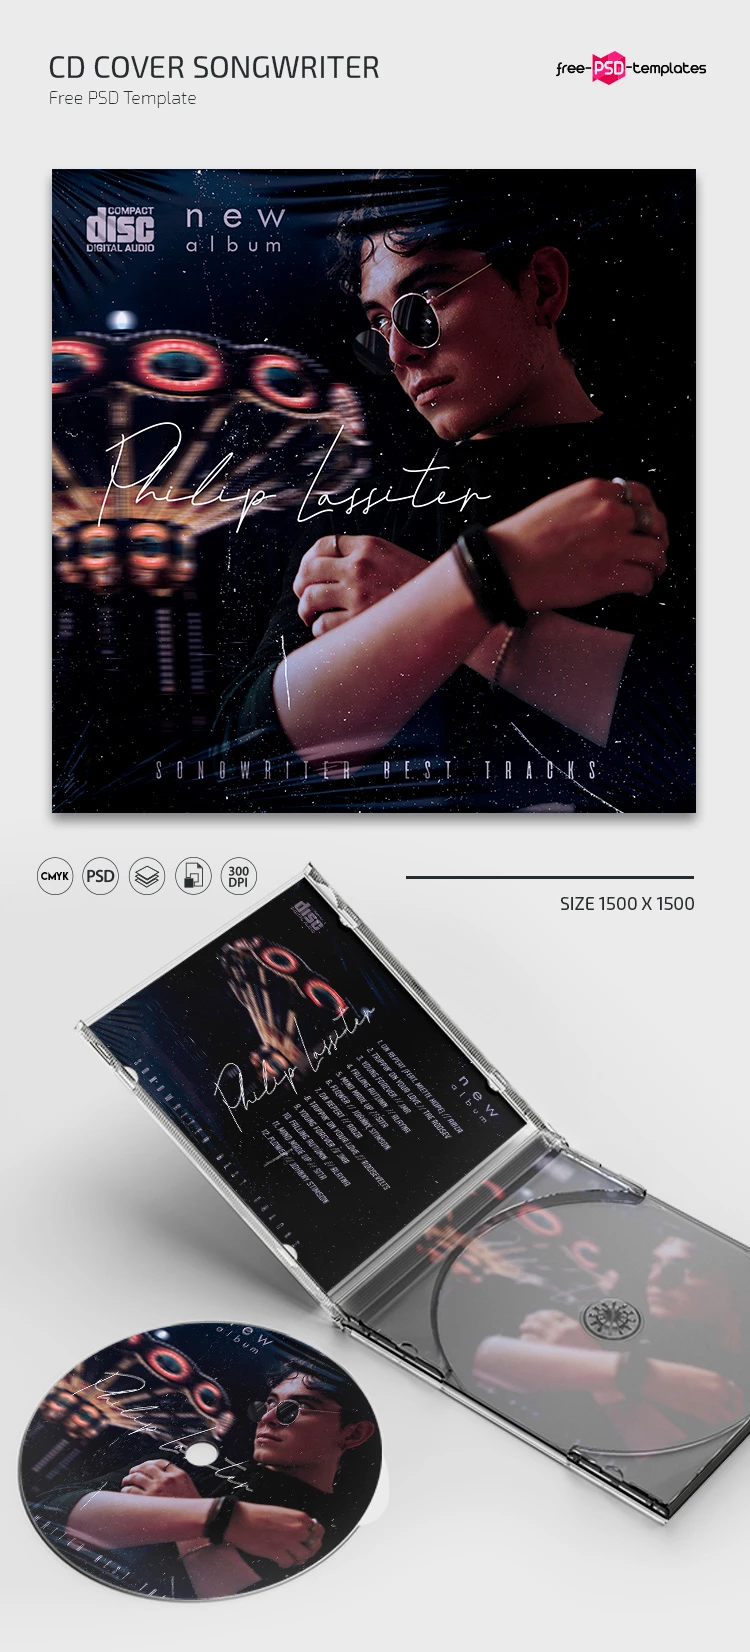 Free Songwriter CD Cover PSD Template